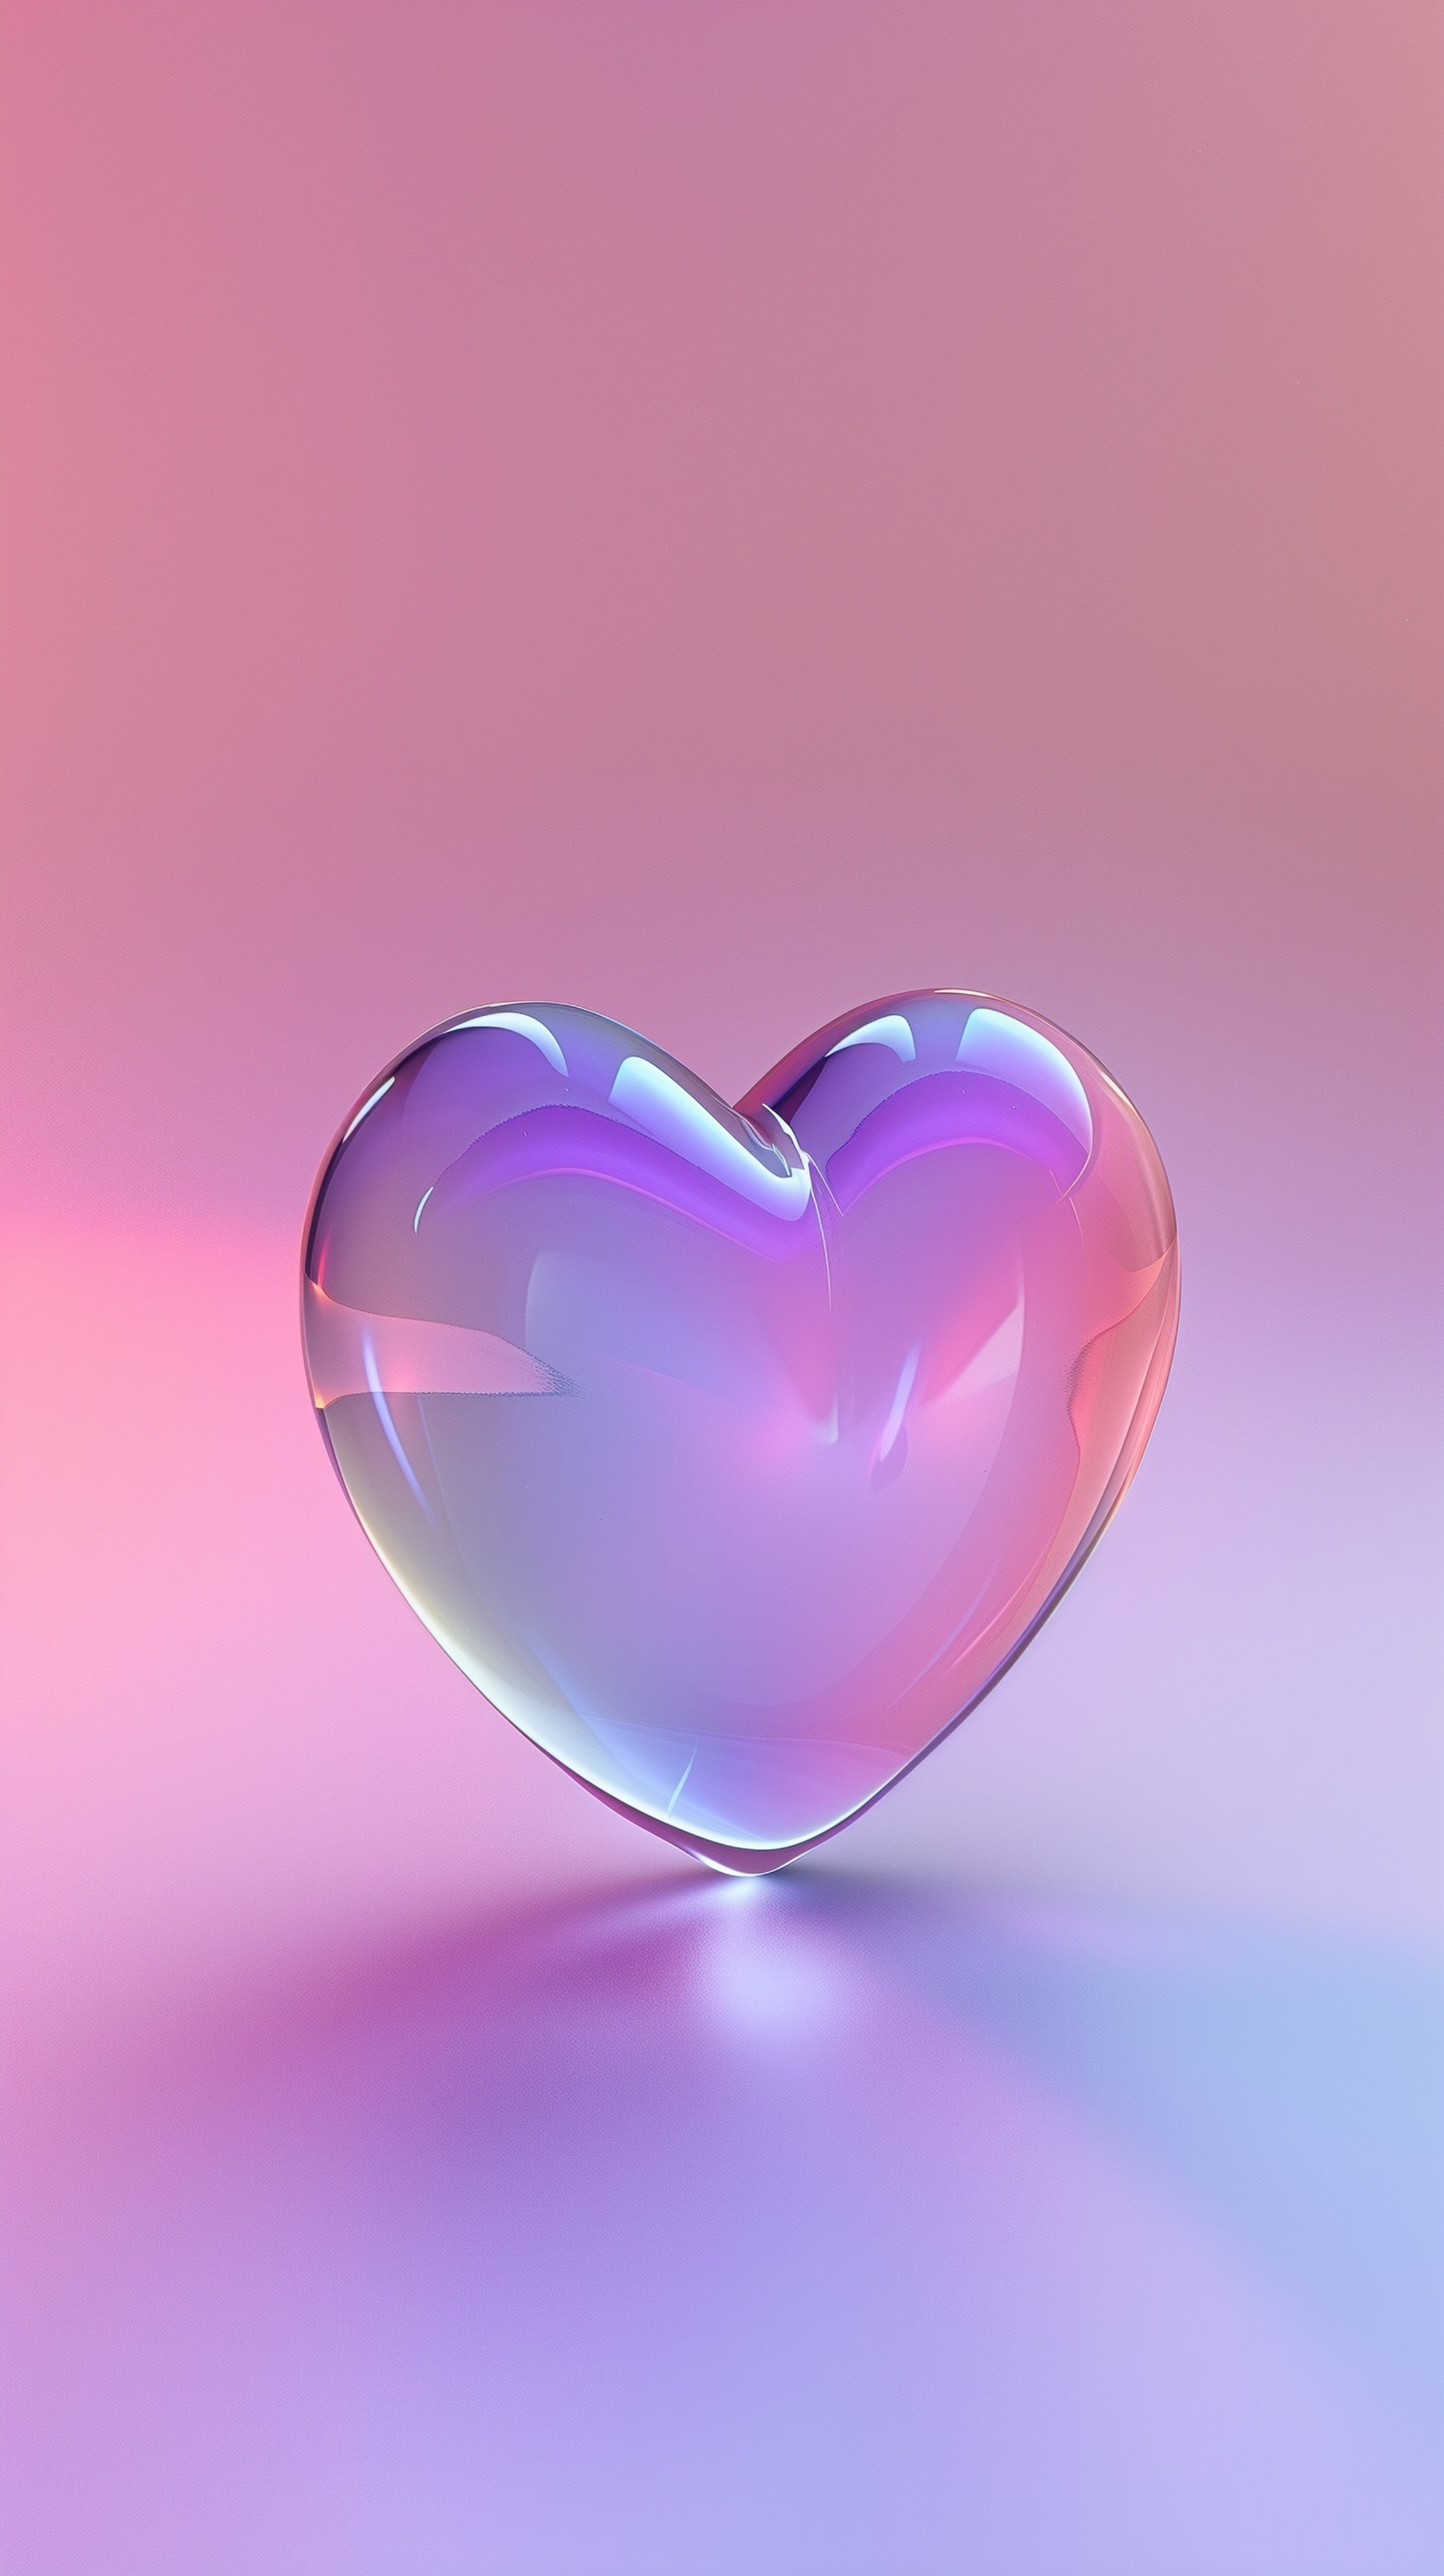 Colorful Glass Heart on Pink Background Wallpaper[47d8940110524ca1b371]